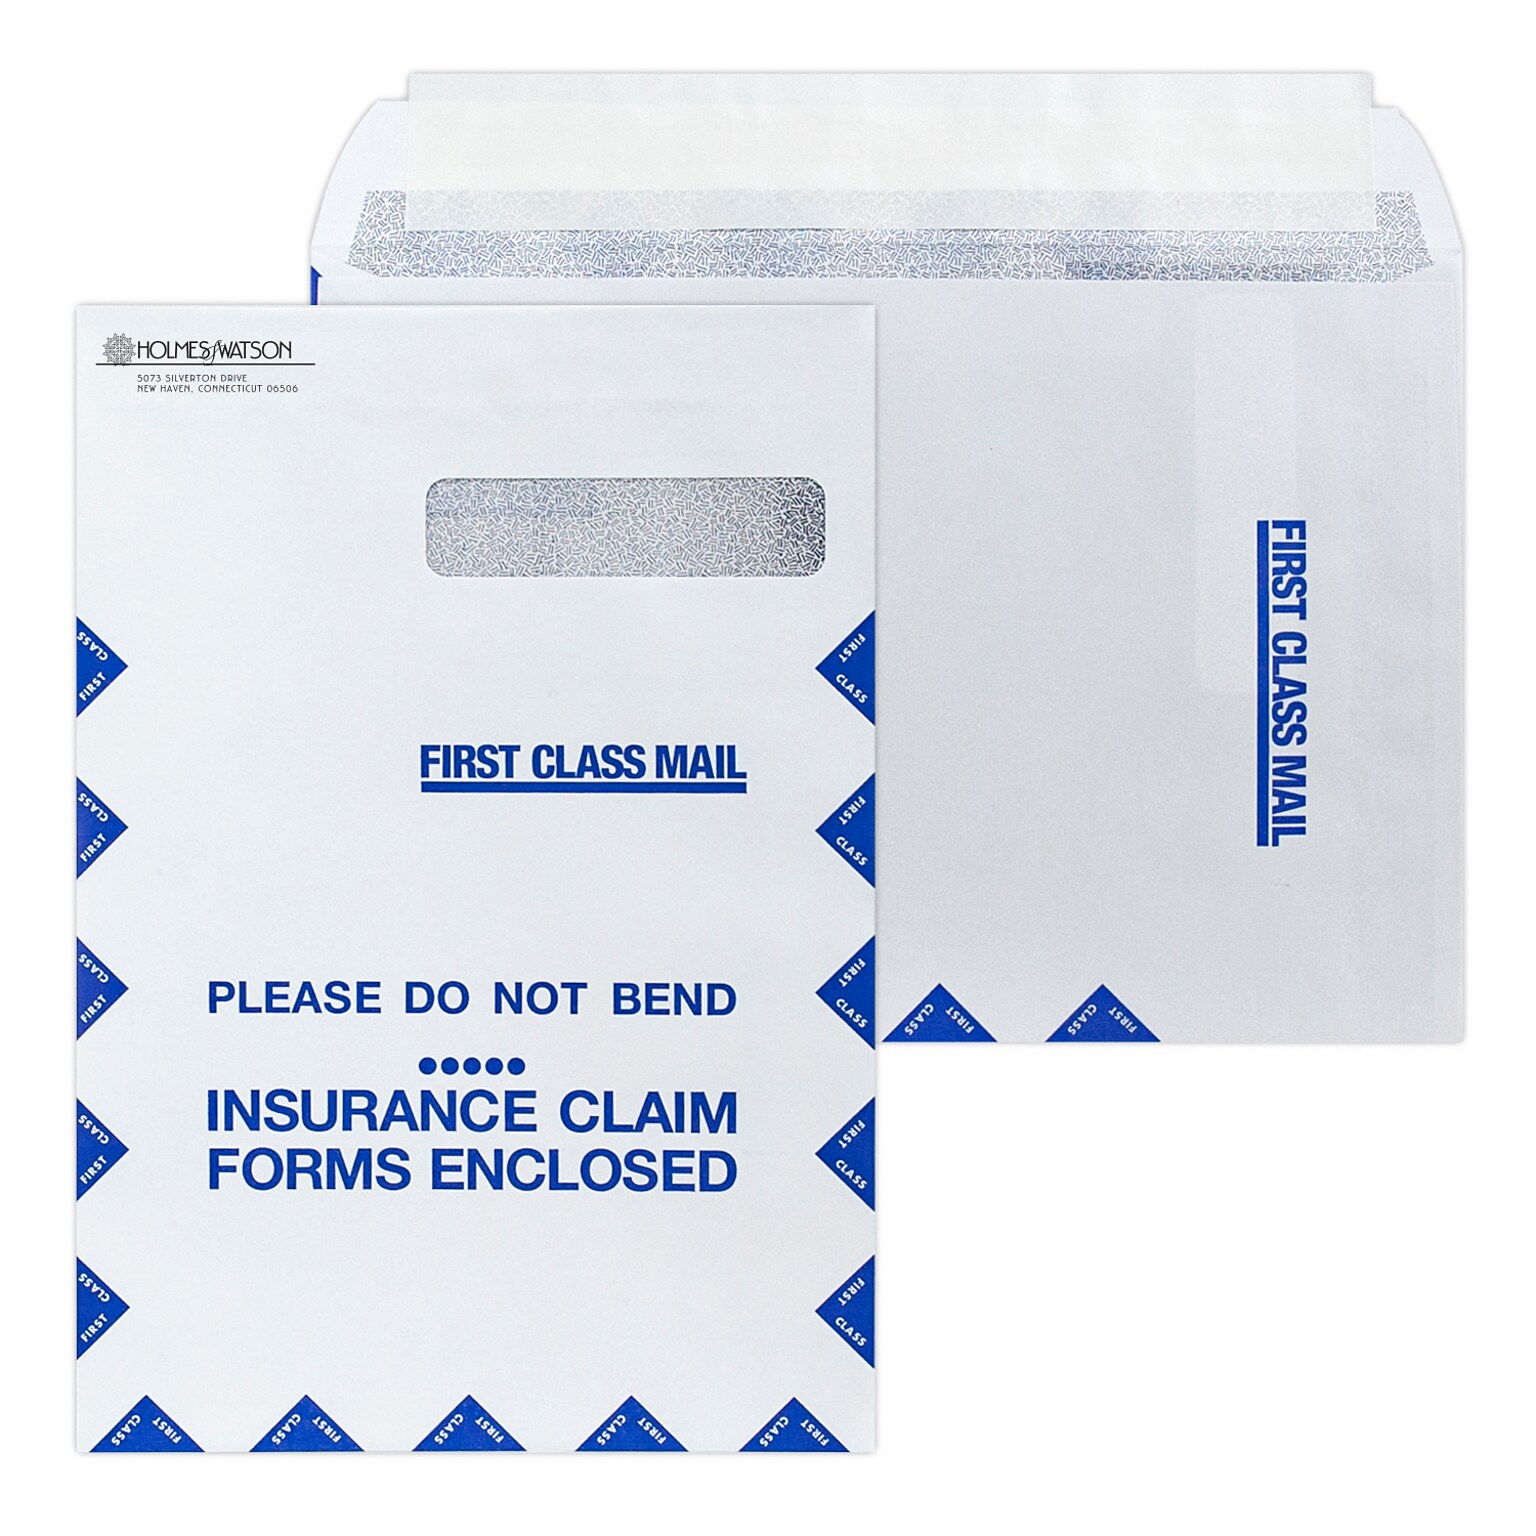 Custom 9 x 13 Resubmission Right Window Self Seal Envelopes with Security Tint, 24# White Wove, 1 Standard Ink, 250 / Pack